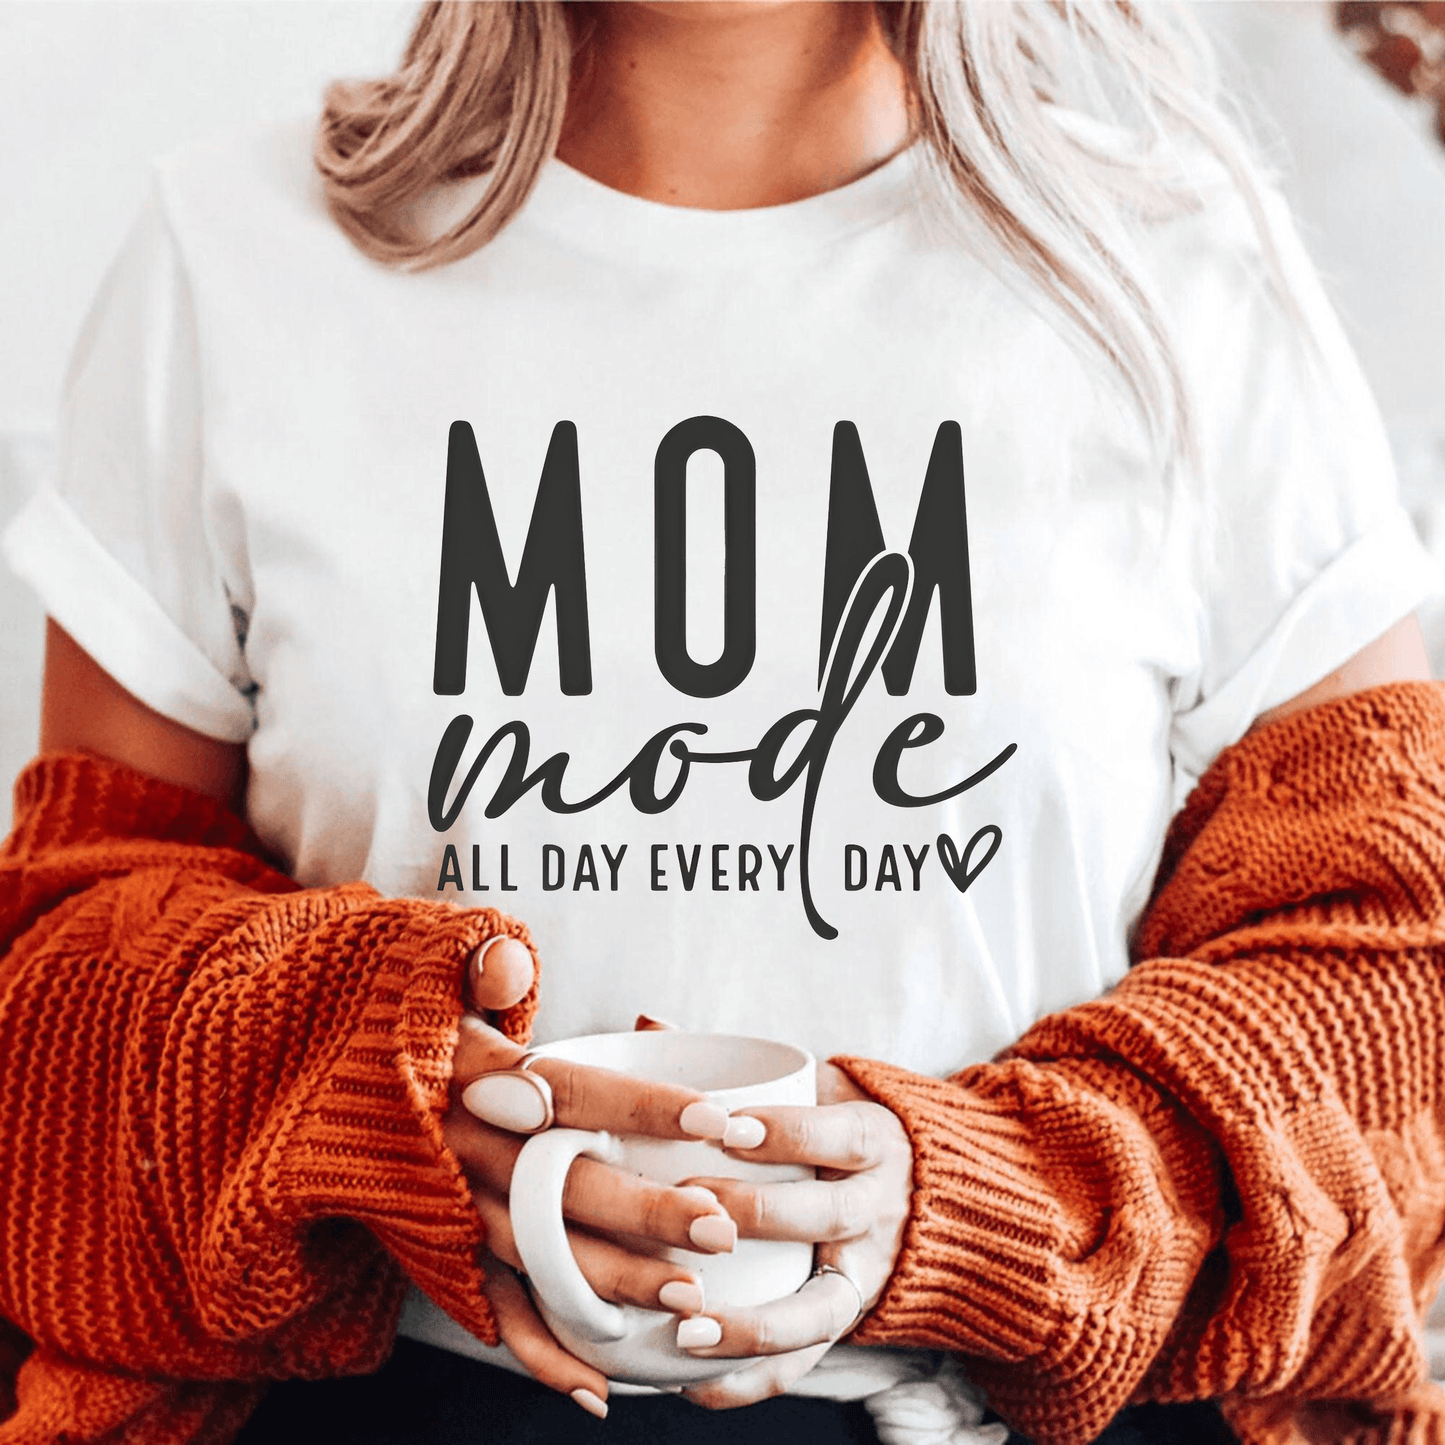 Mom Mode All Day Every Day Shirt - Perfect Mother's Day Gift - GiftHaus